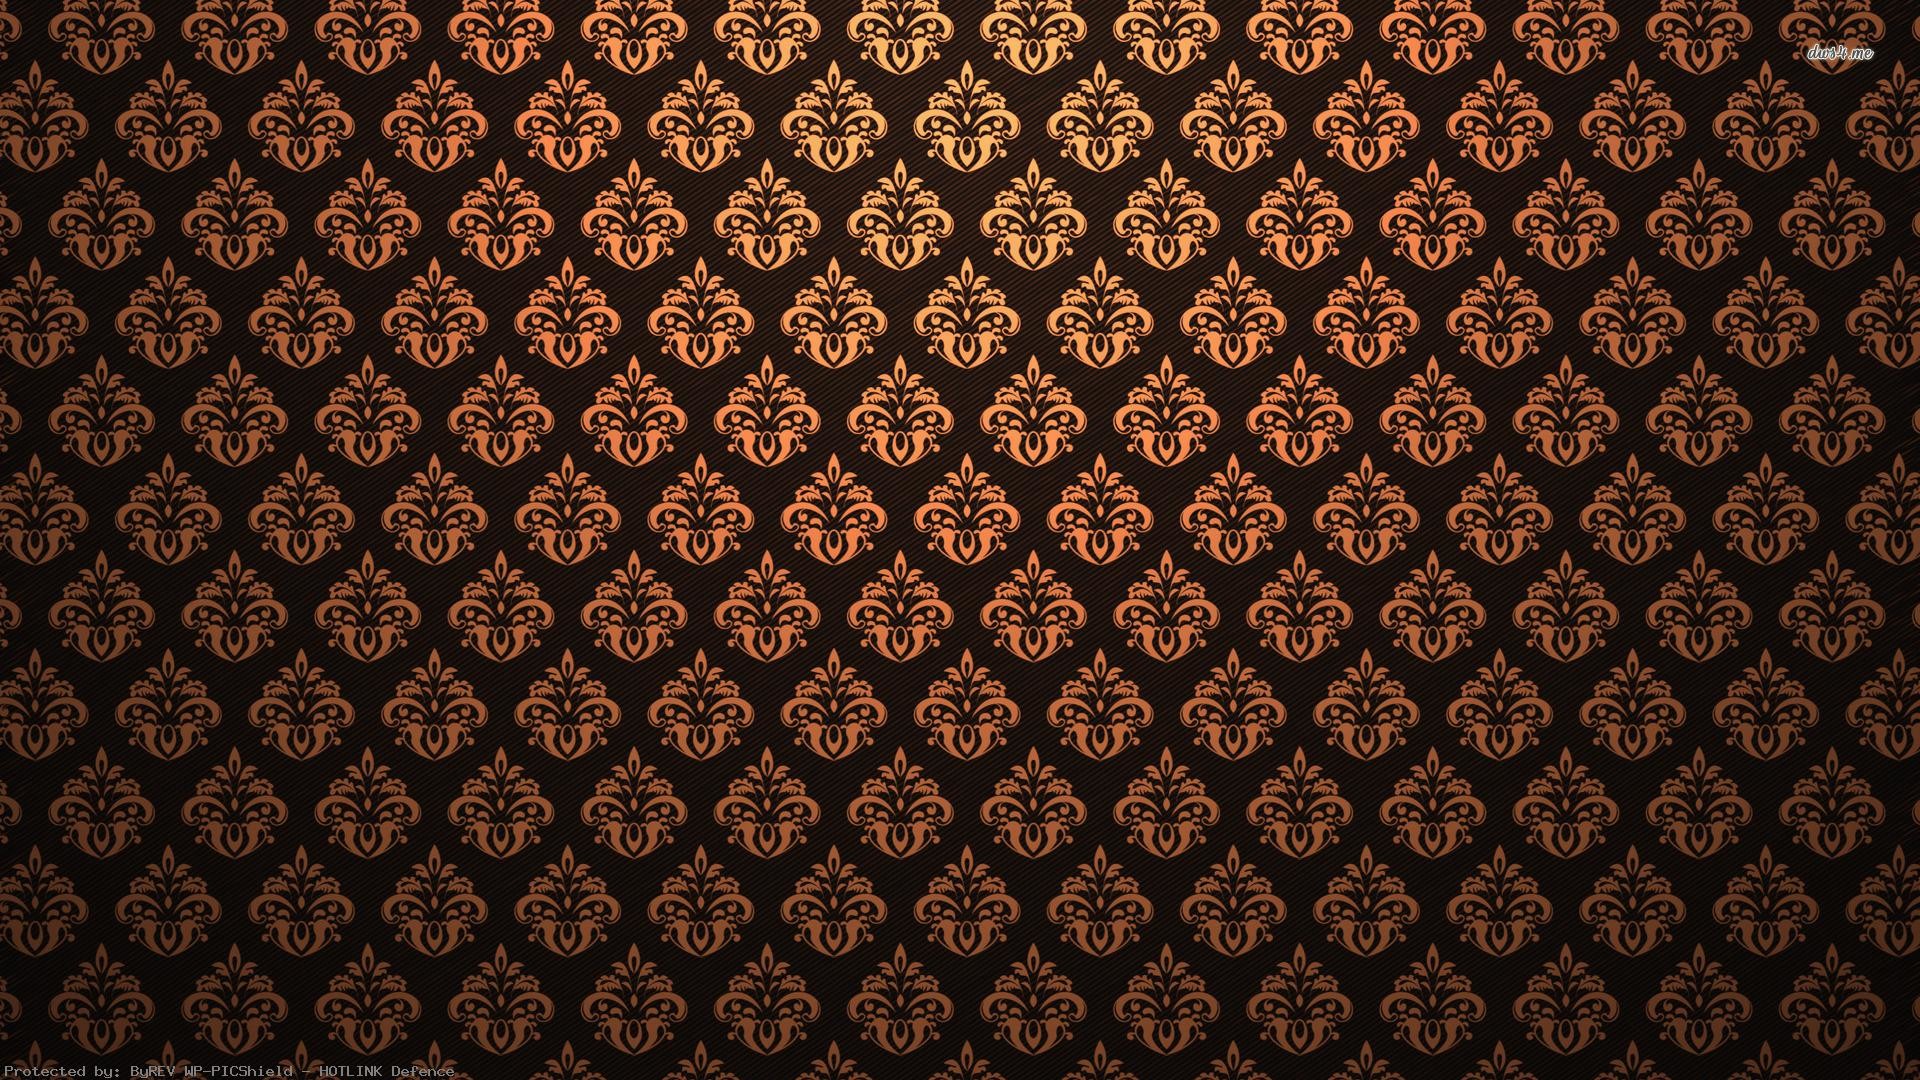 1920x1080 Seamless-Vintage-Pattern-Images-h--px-MB-